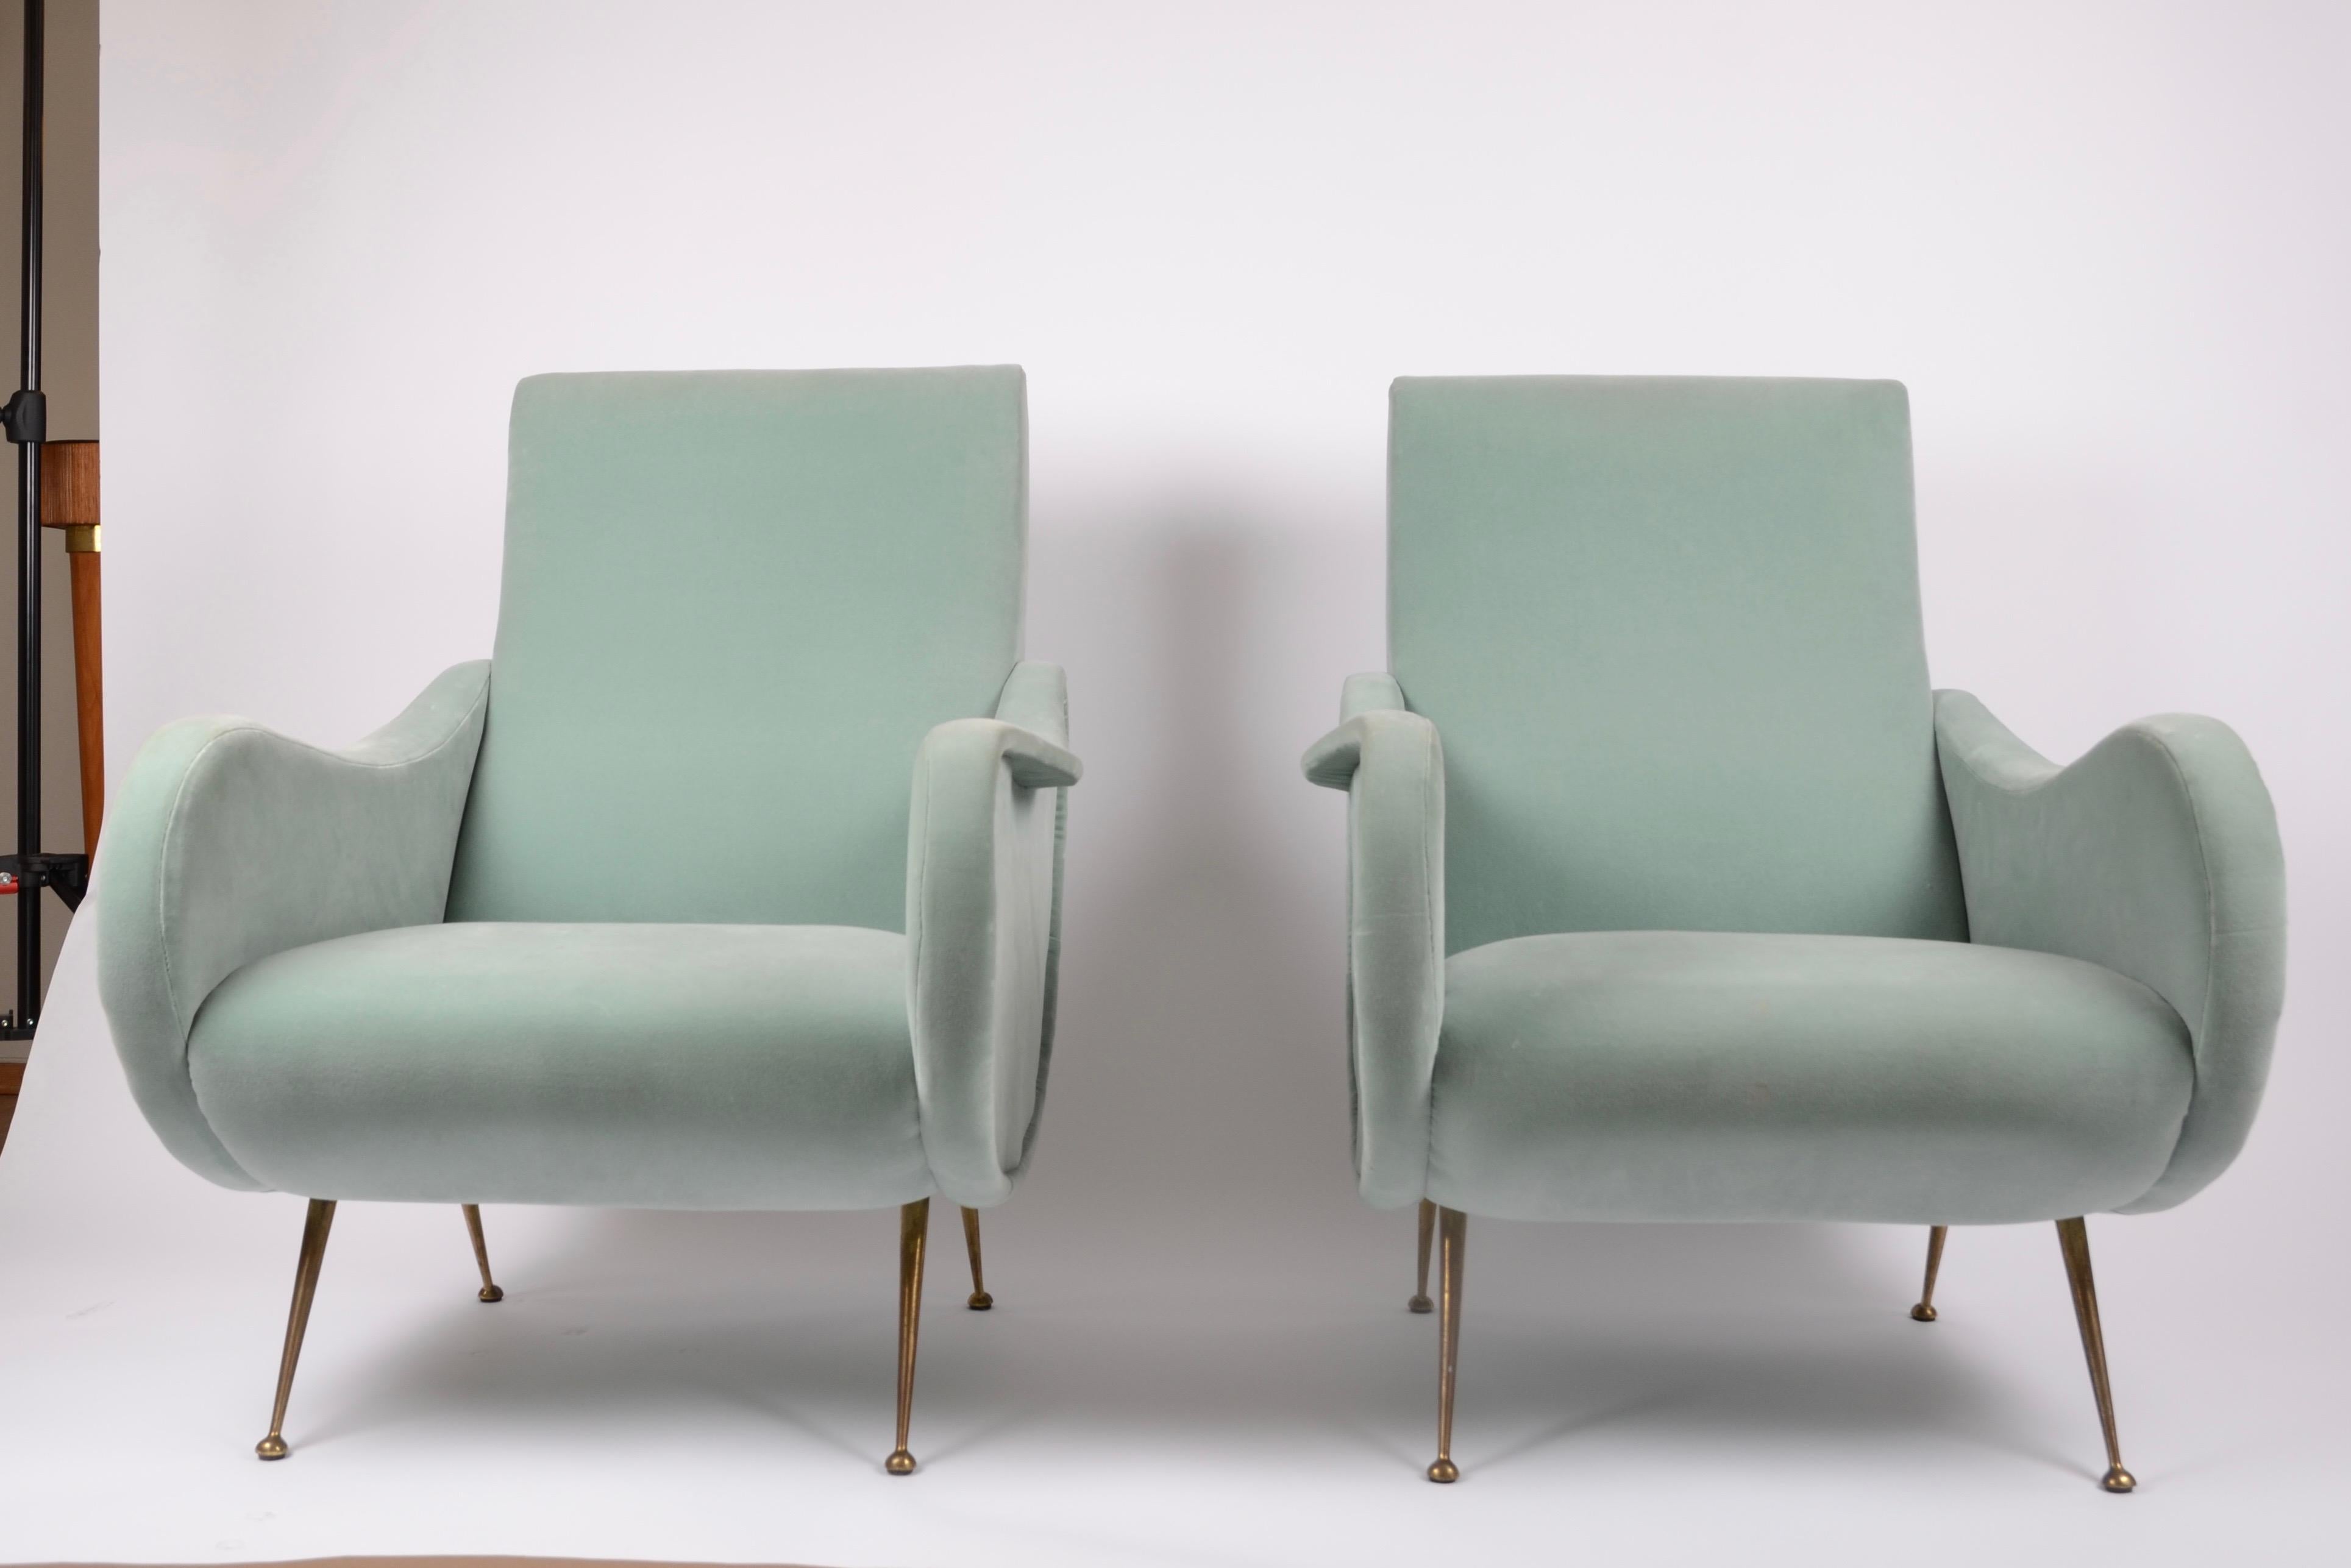 A pair of Italian lounge chairs, mid-1900s.